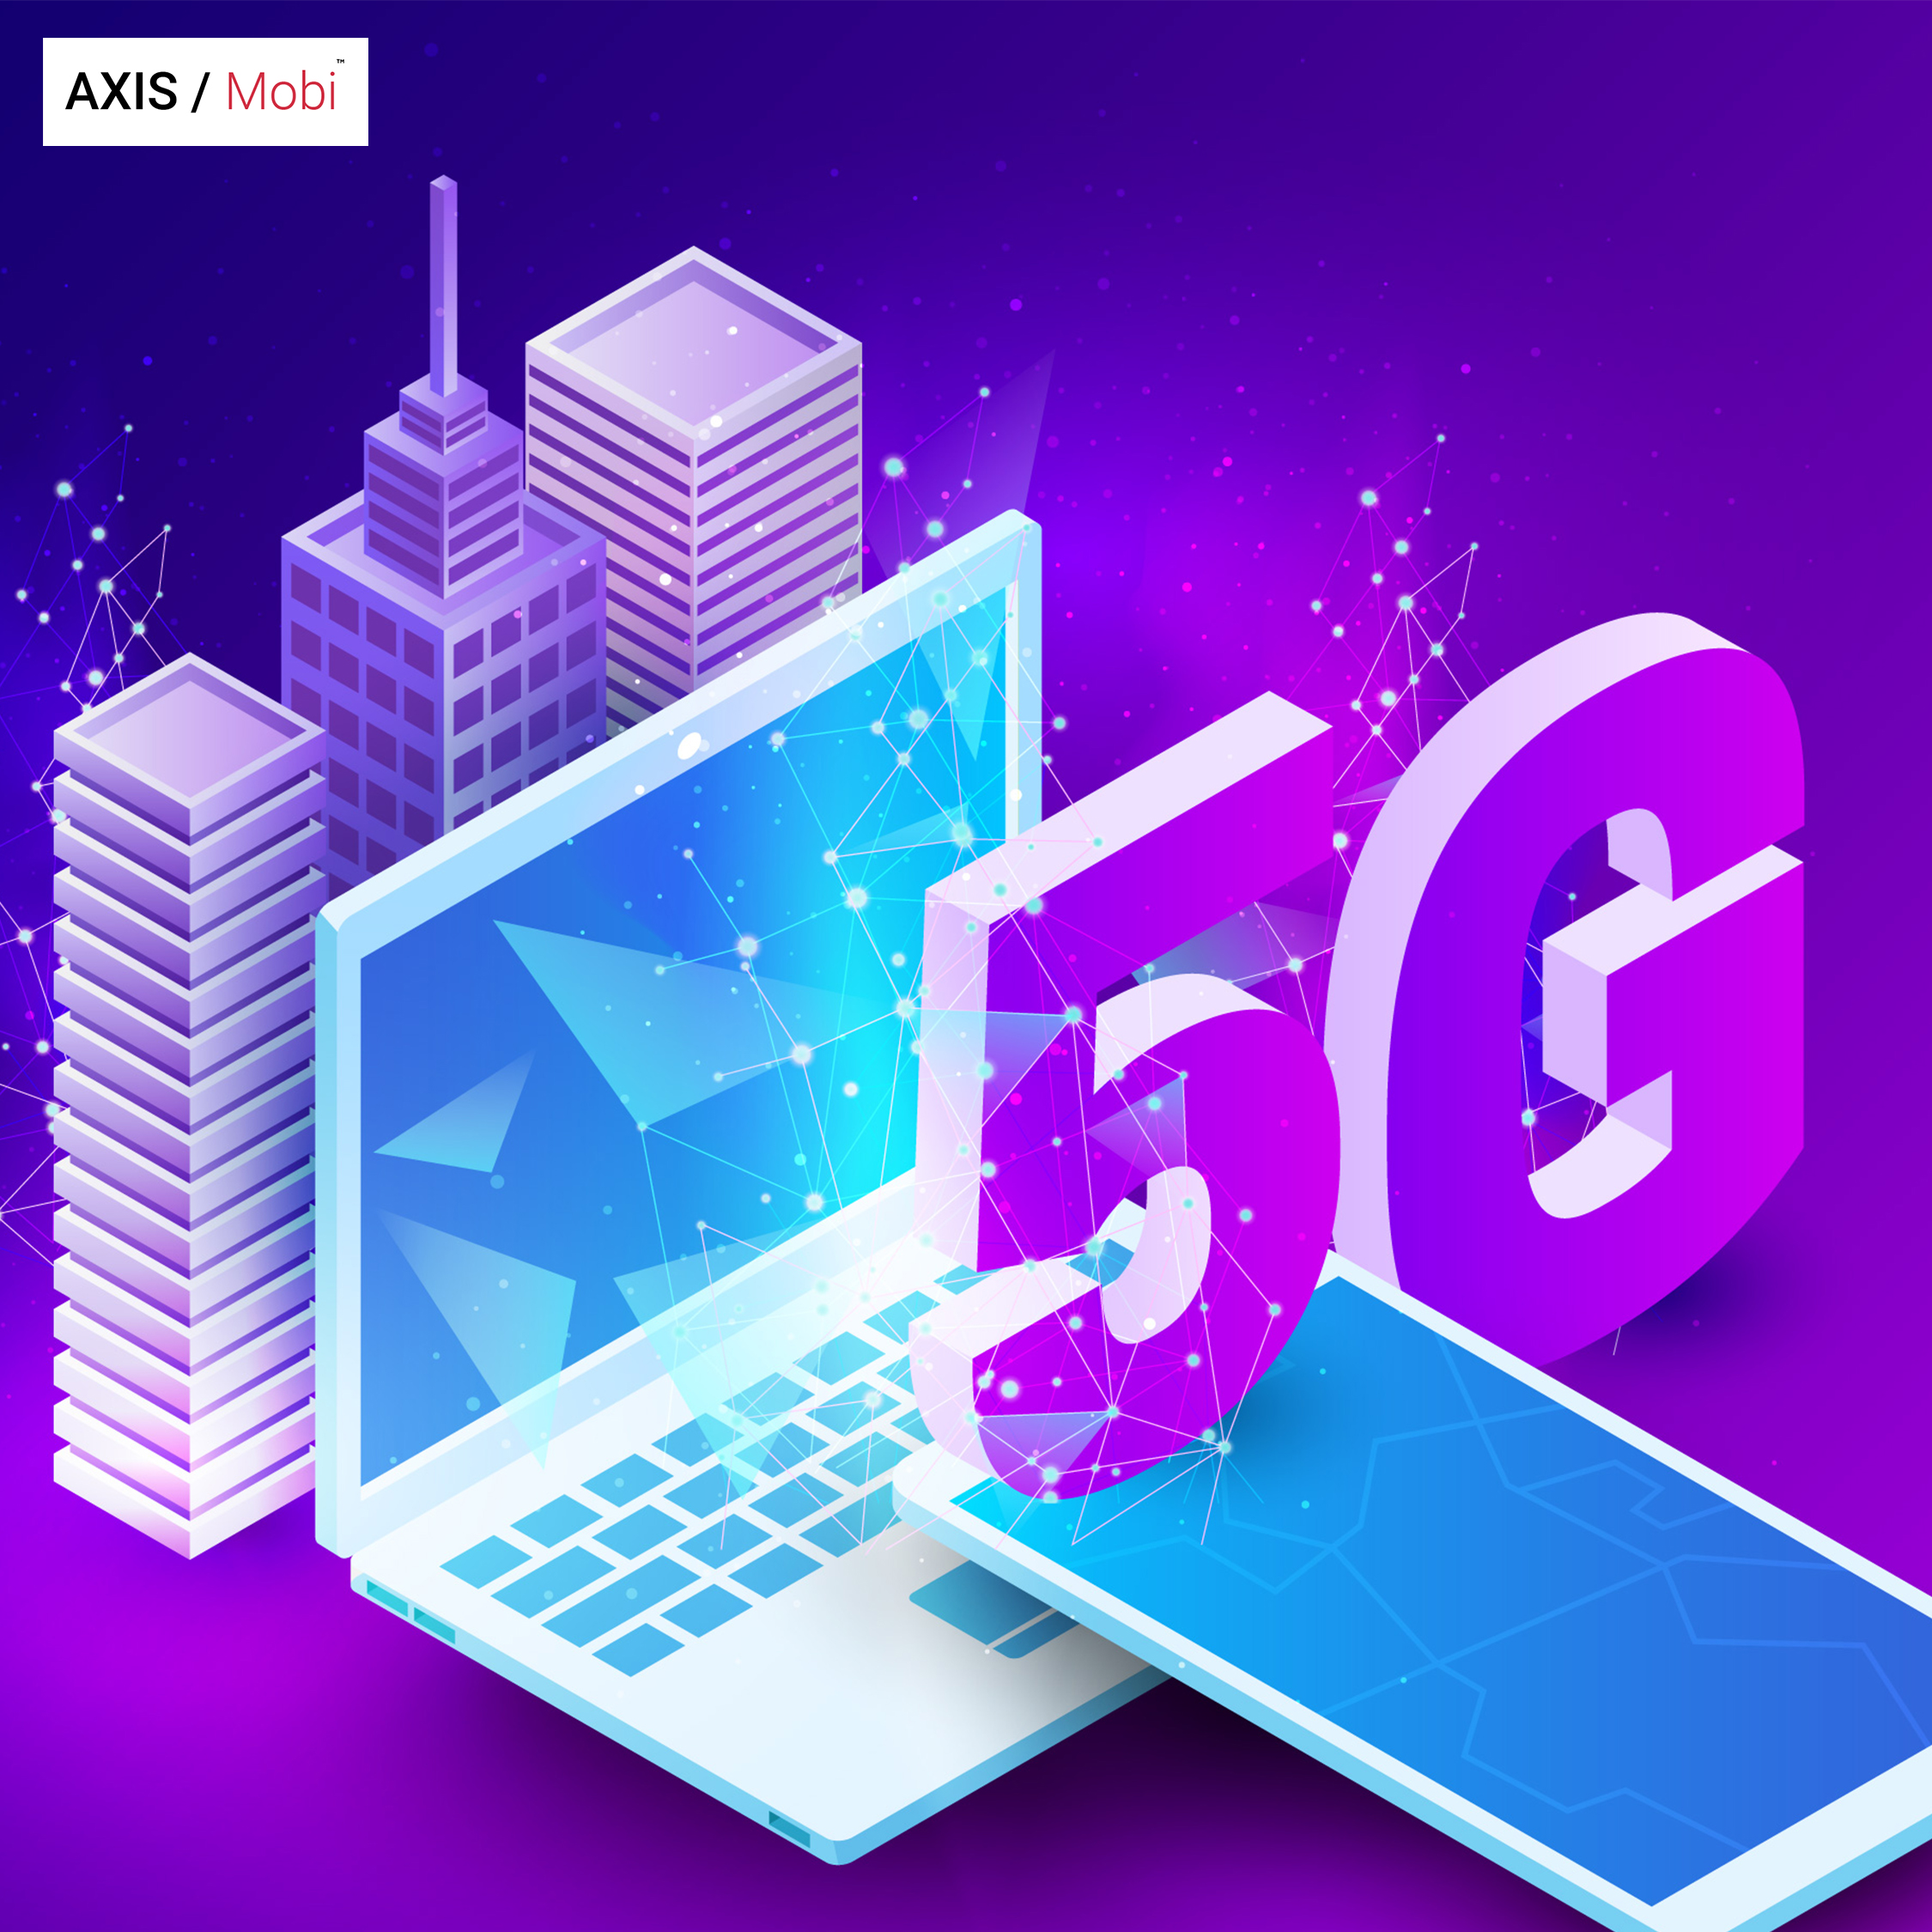 Other 5G anticipated advantages include